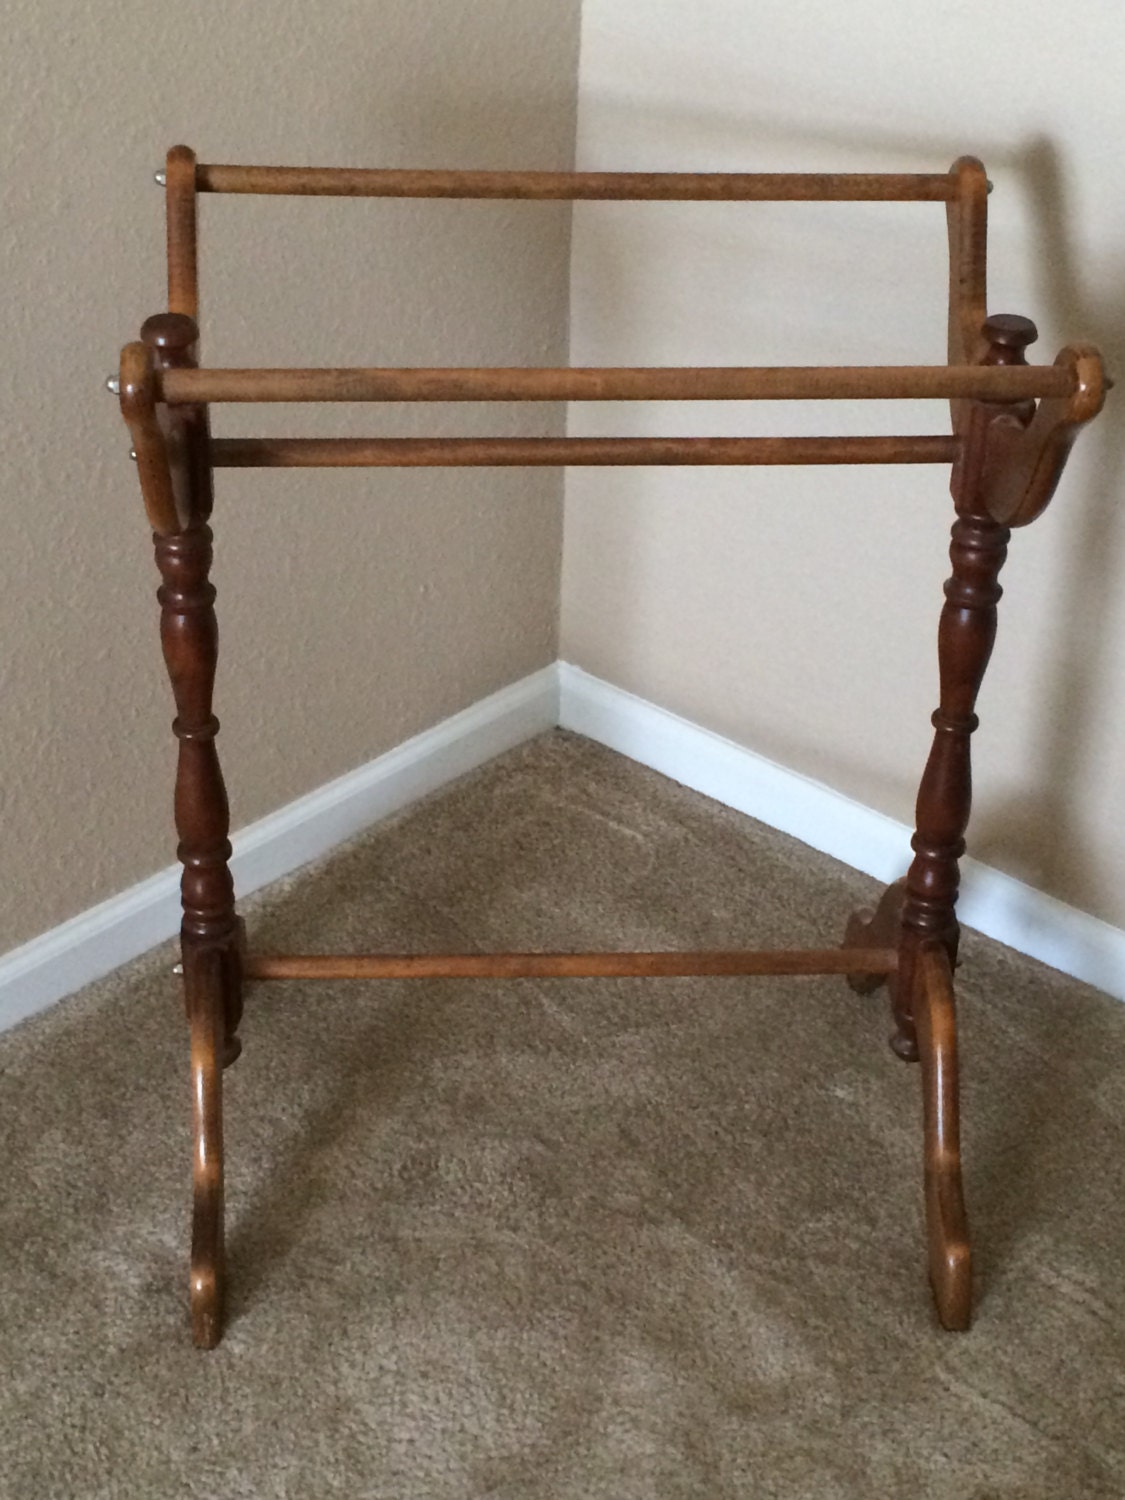 Free US Shipping: Vintage Wooden Quilt Rack by ...